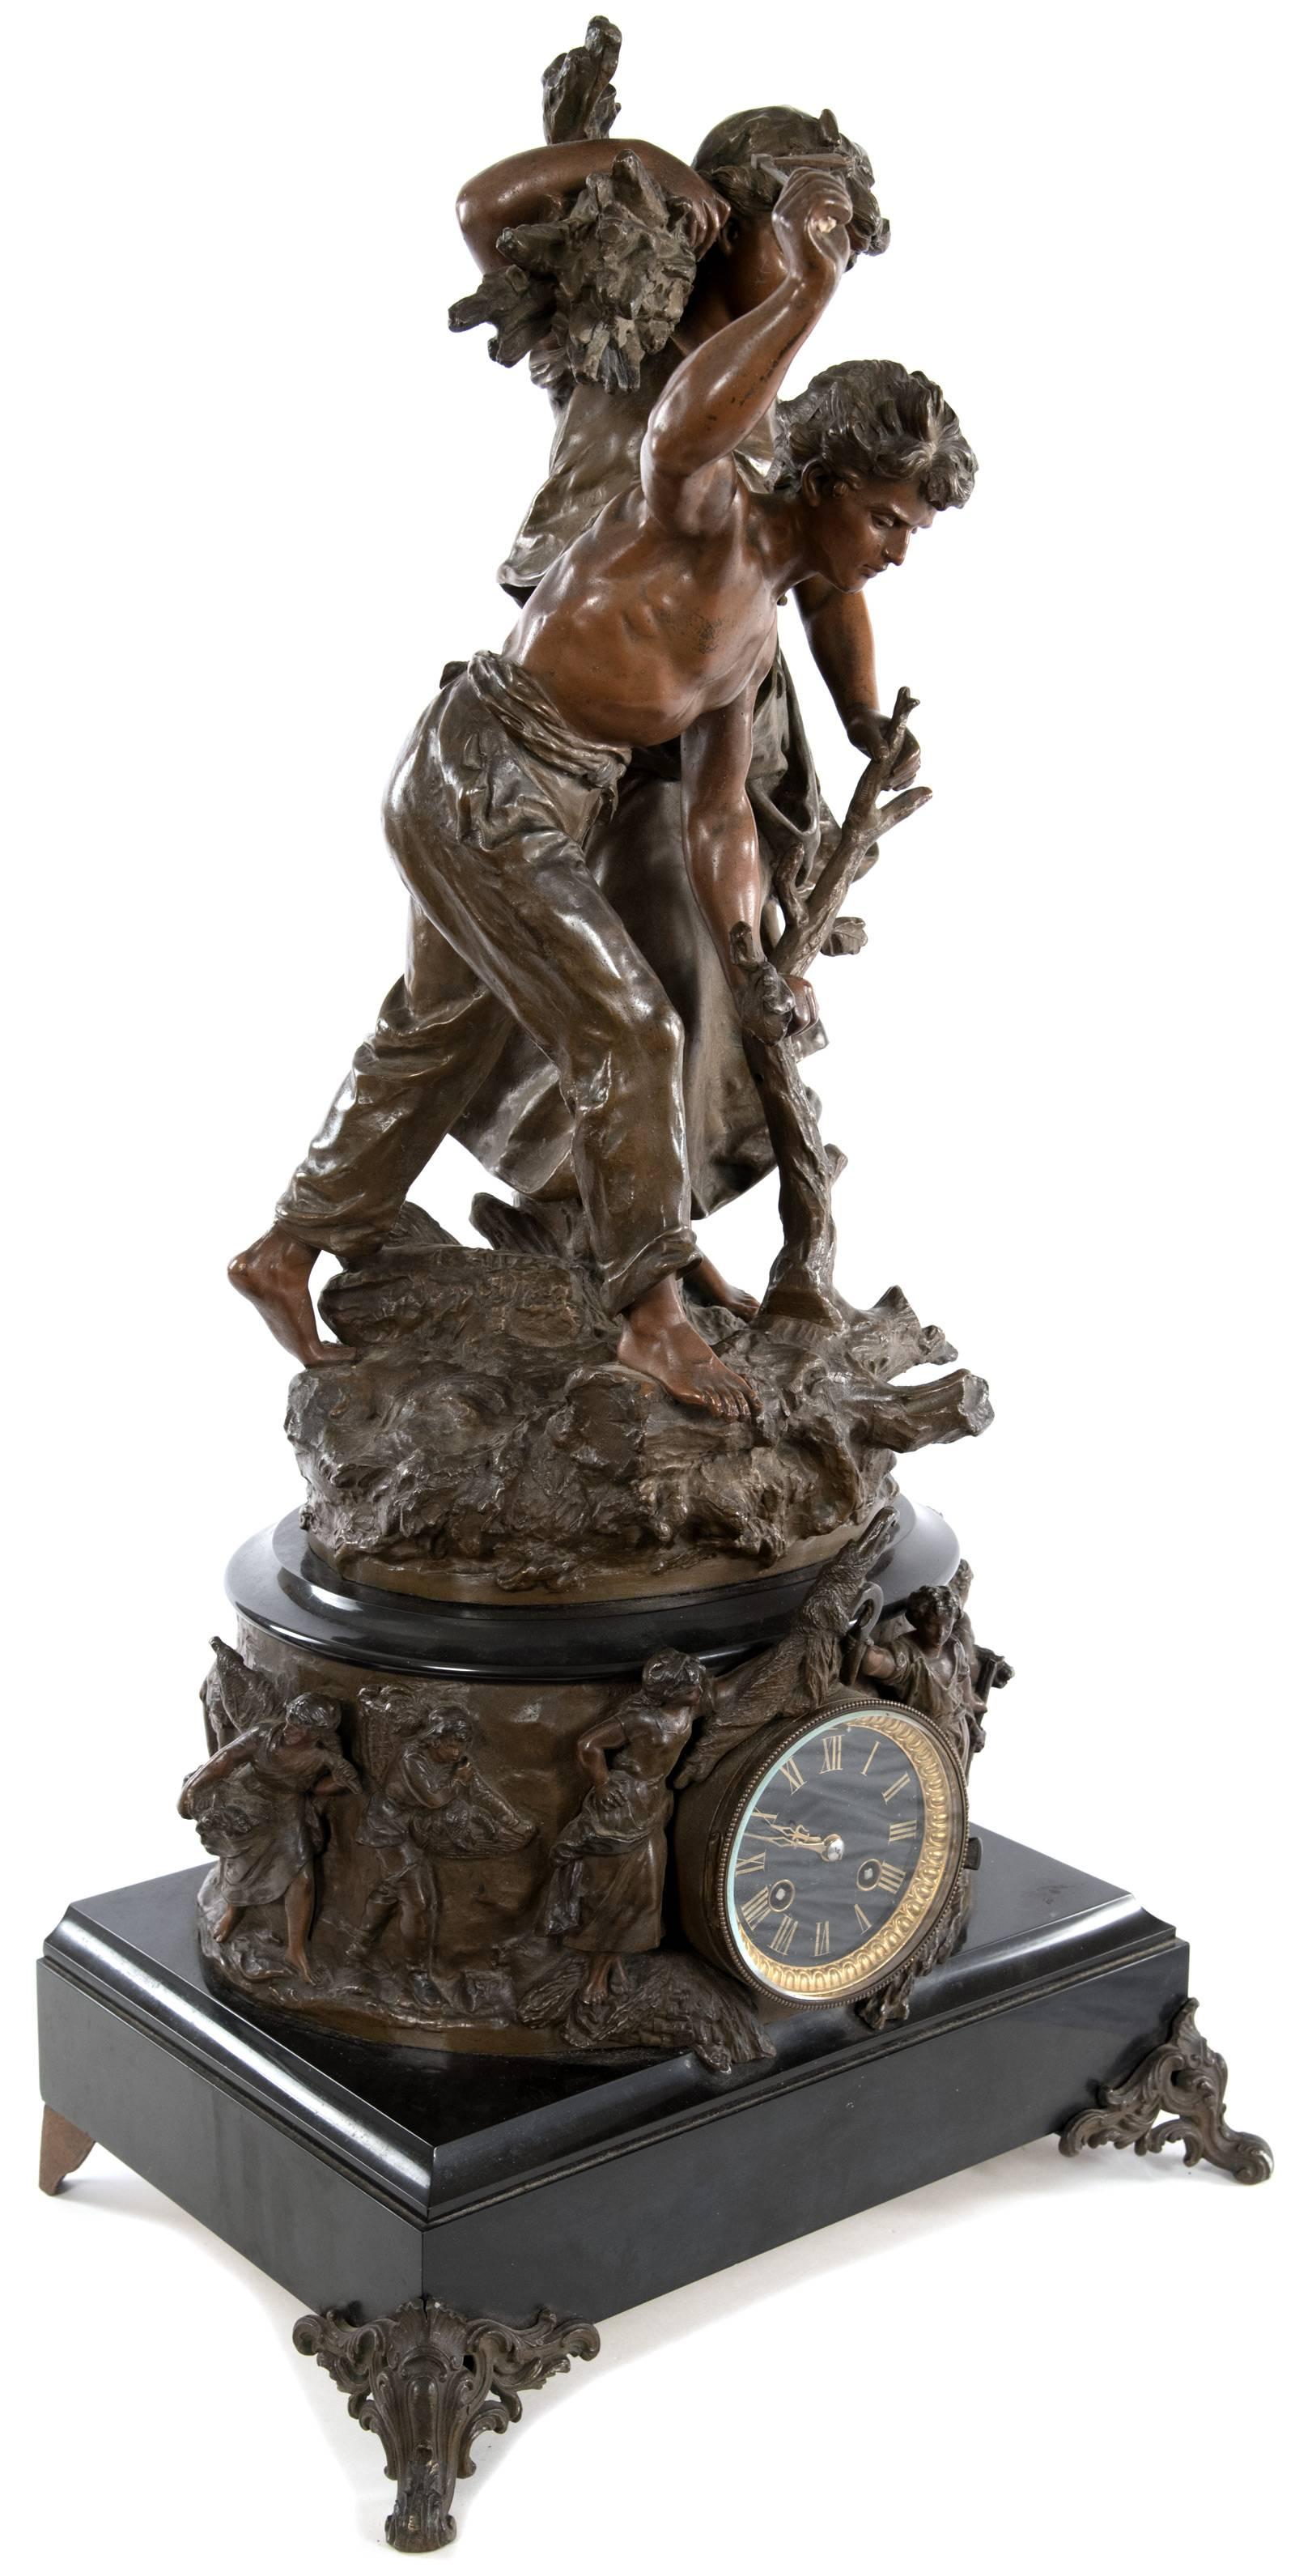 French Provincial French Figurative Mantel Clock by Hippolyte Moreau